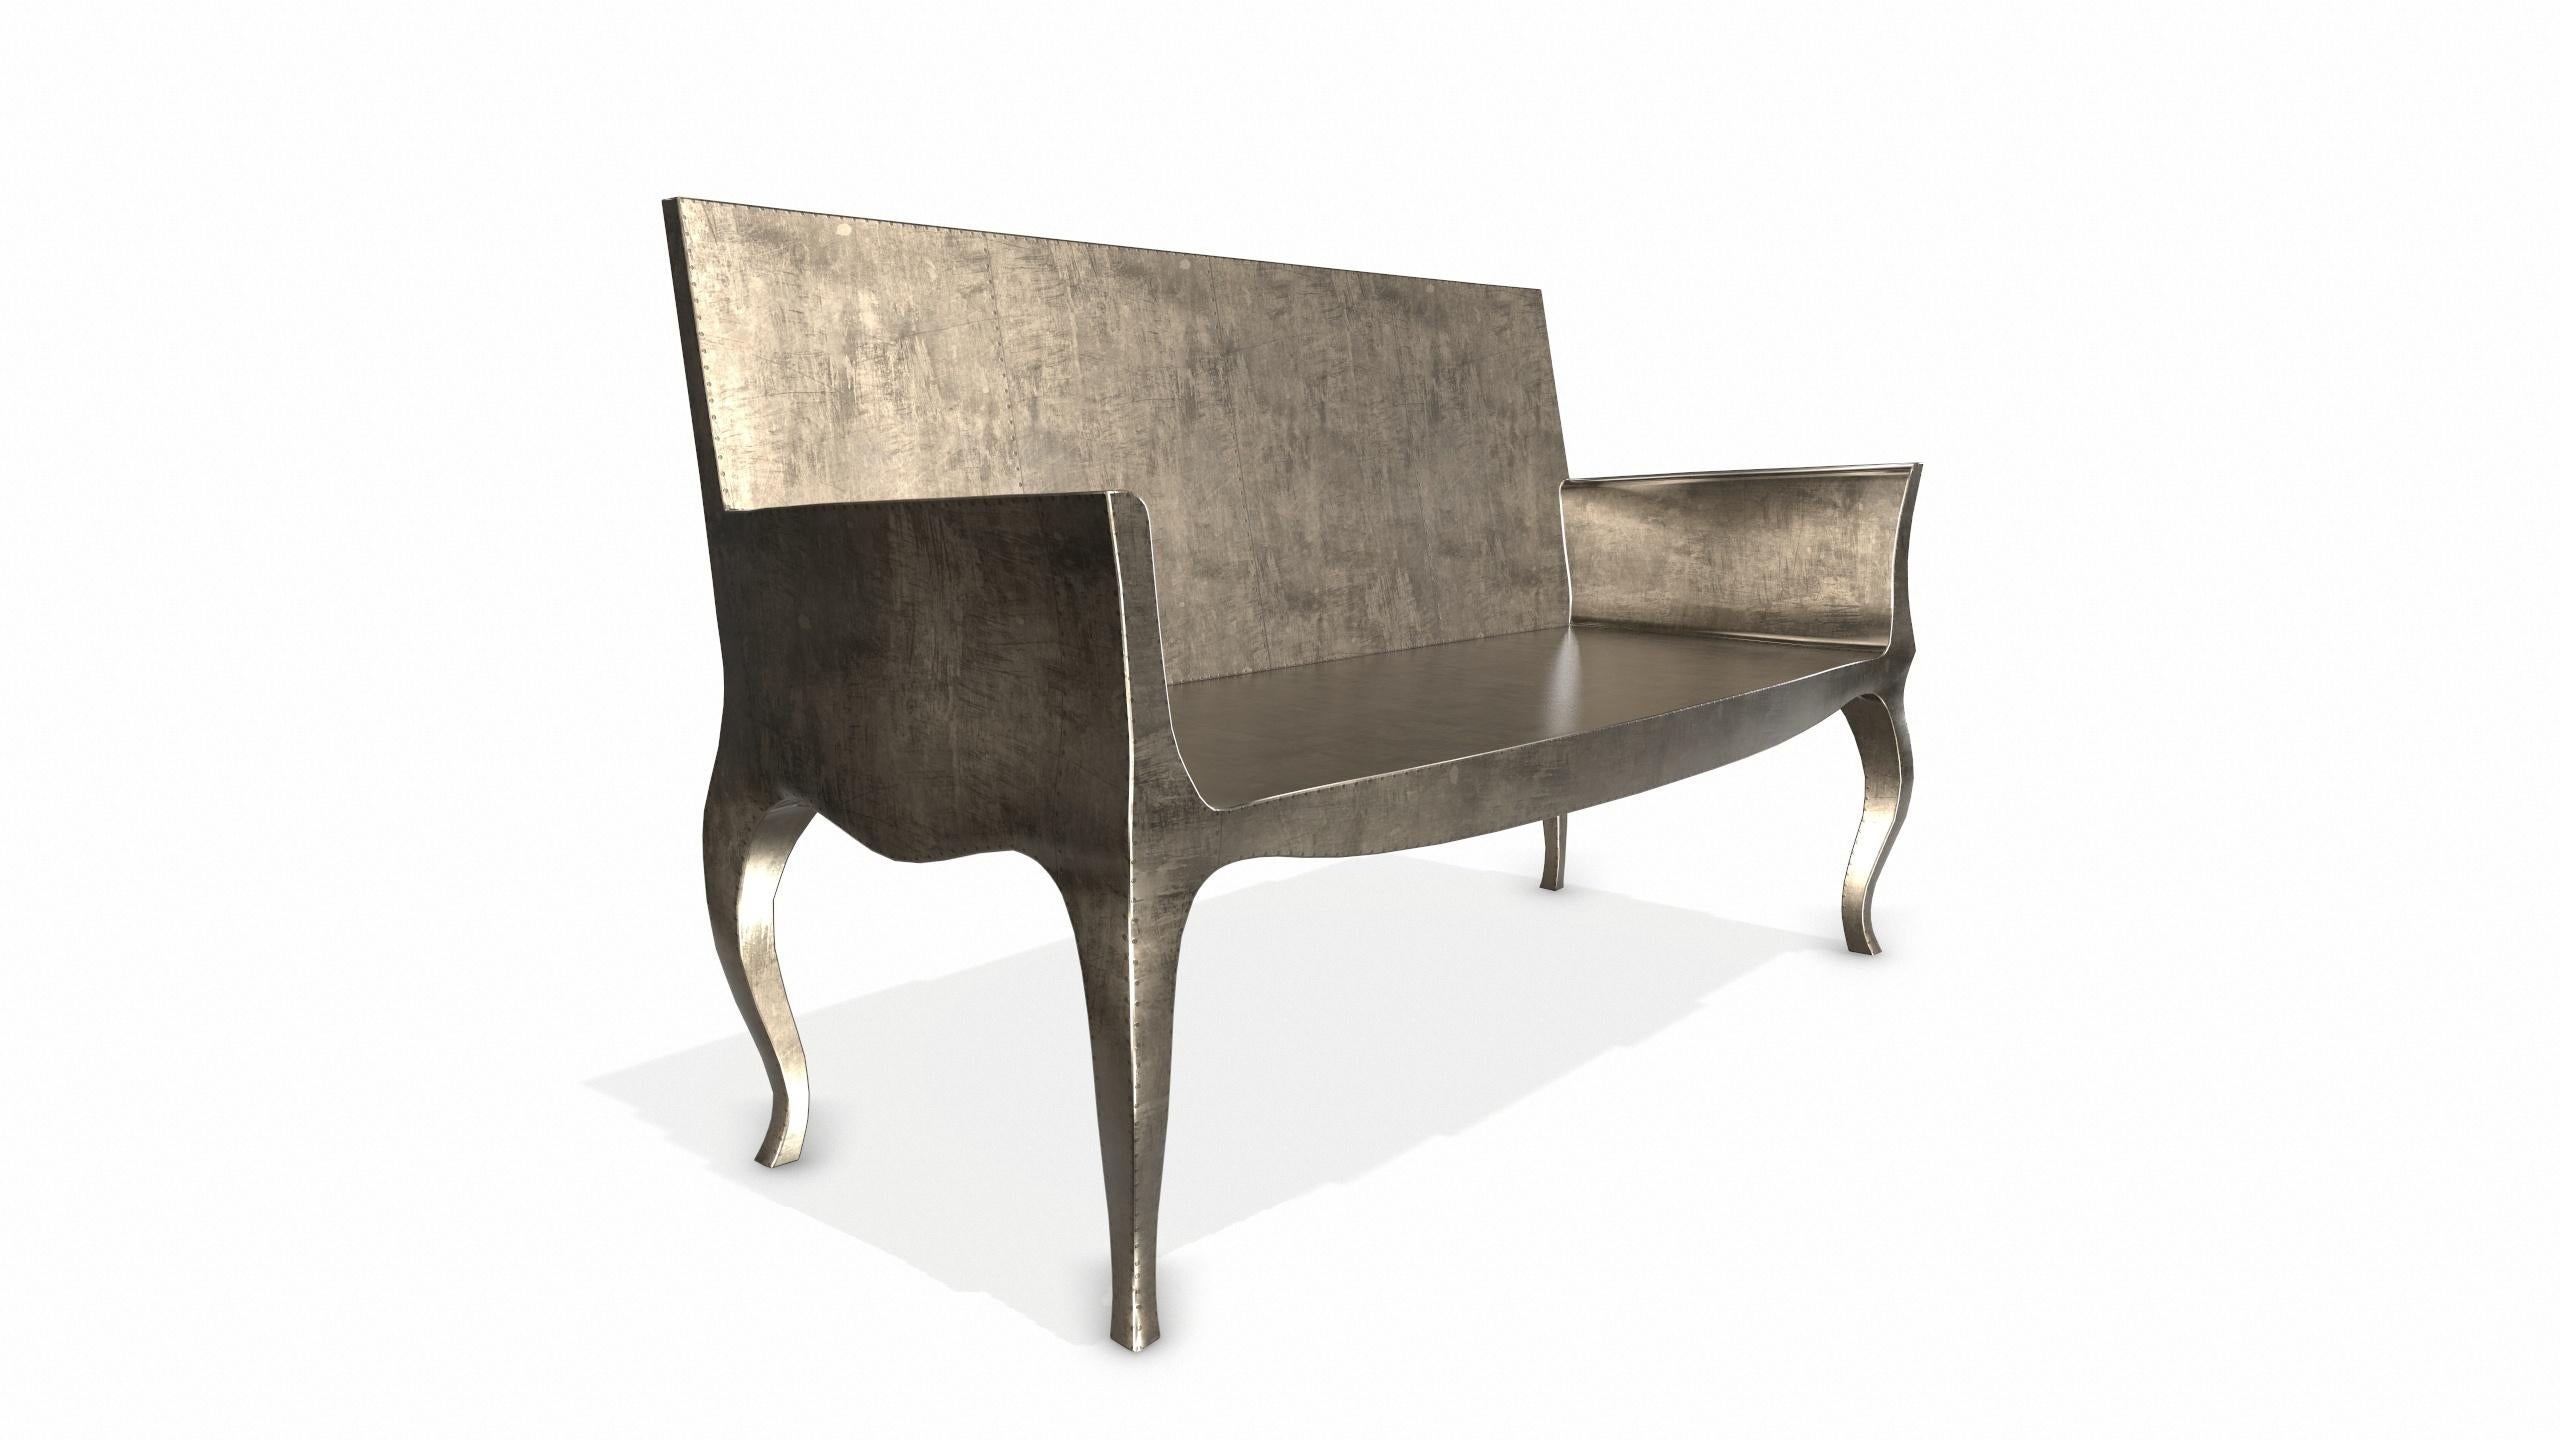 Louise Settee Art Deco Chaise Longues in Smooth Antique Bronze by Paul Mathieu In New Condition For Sale In New York, NY